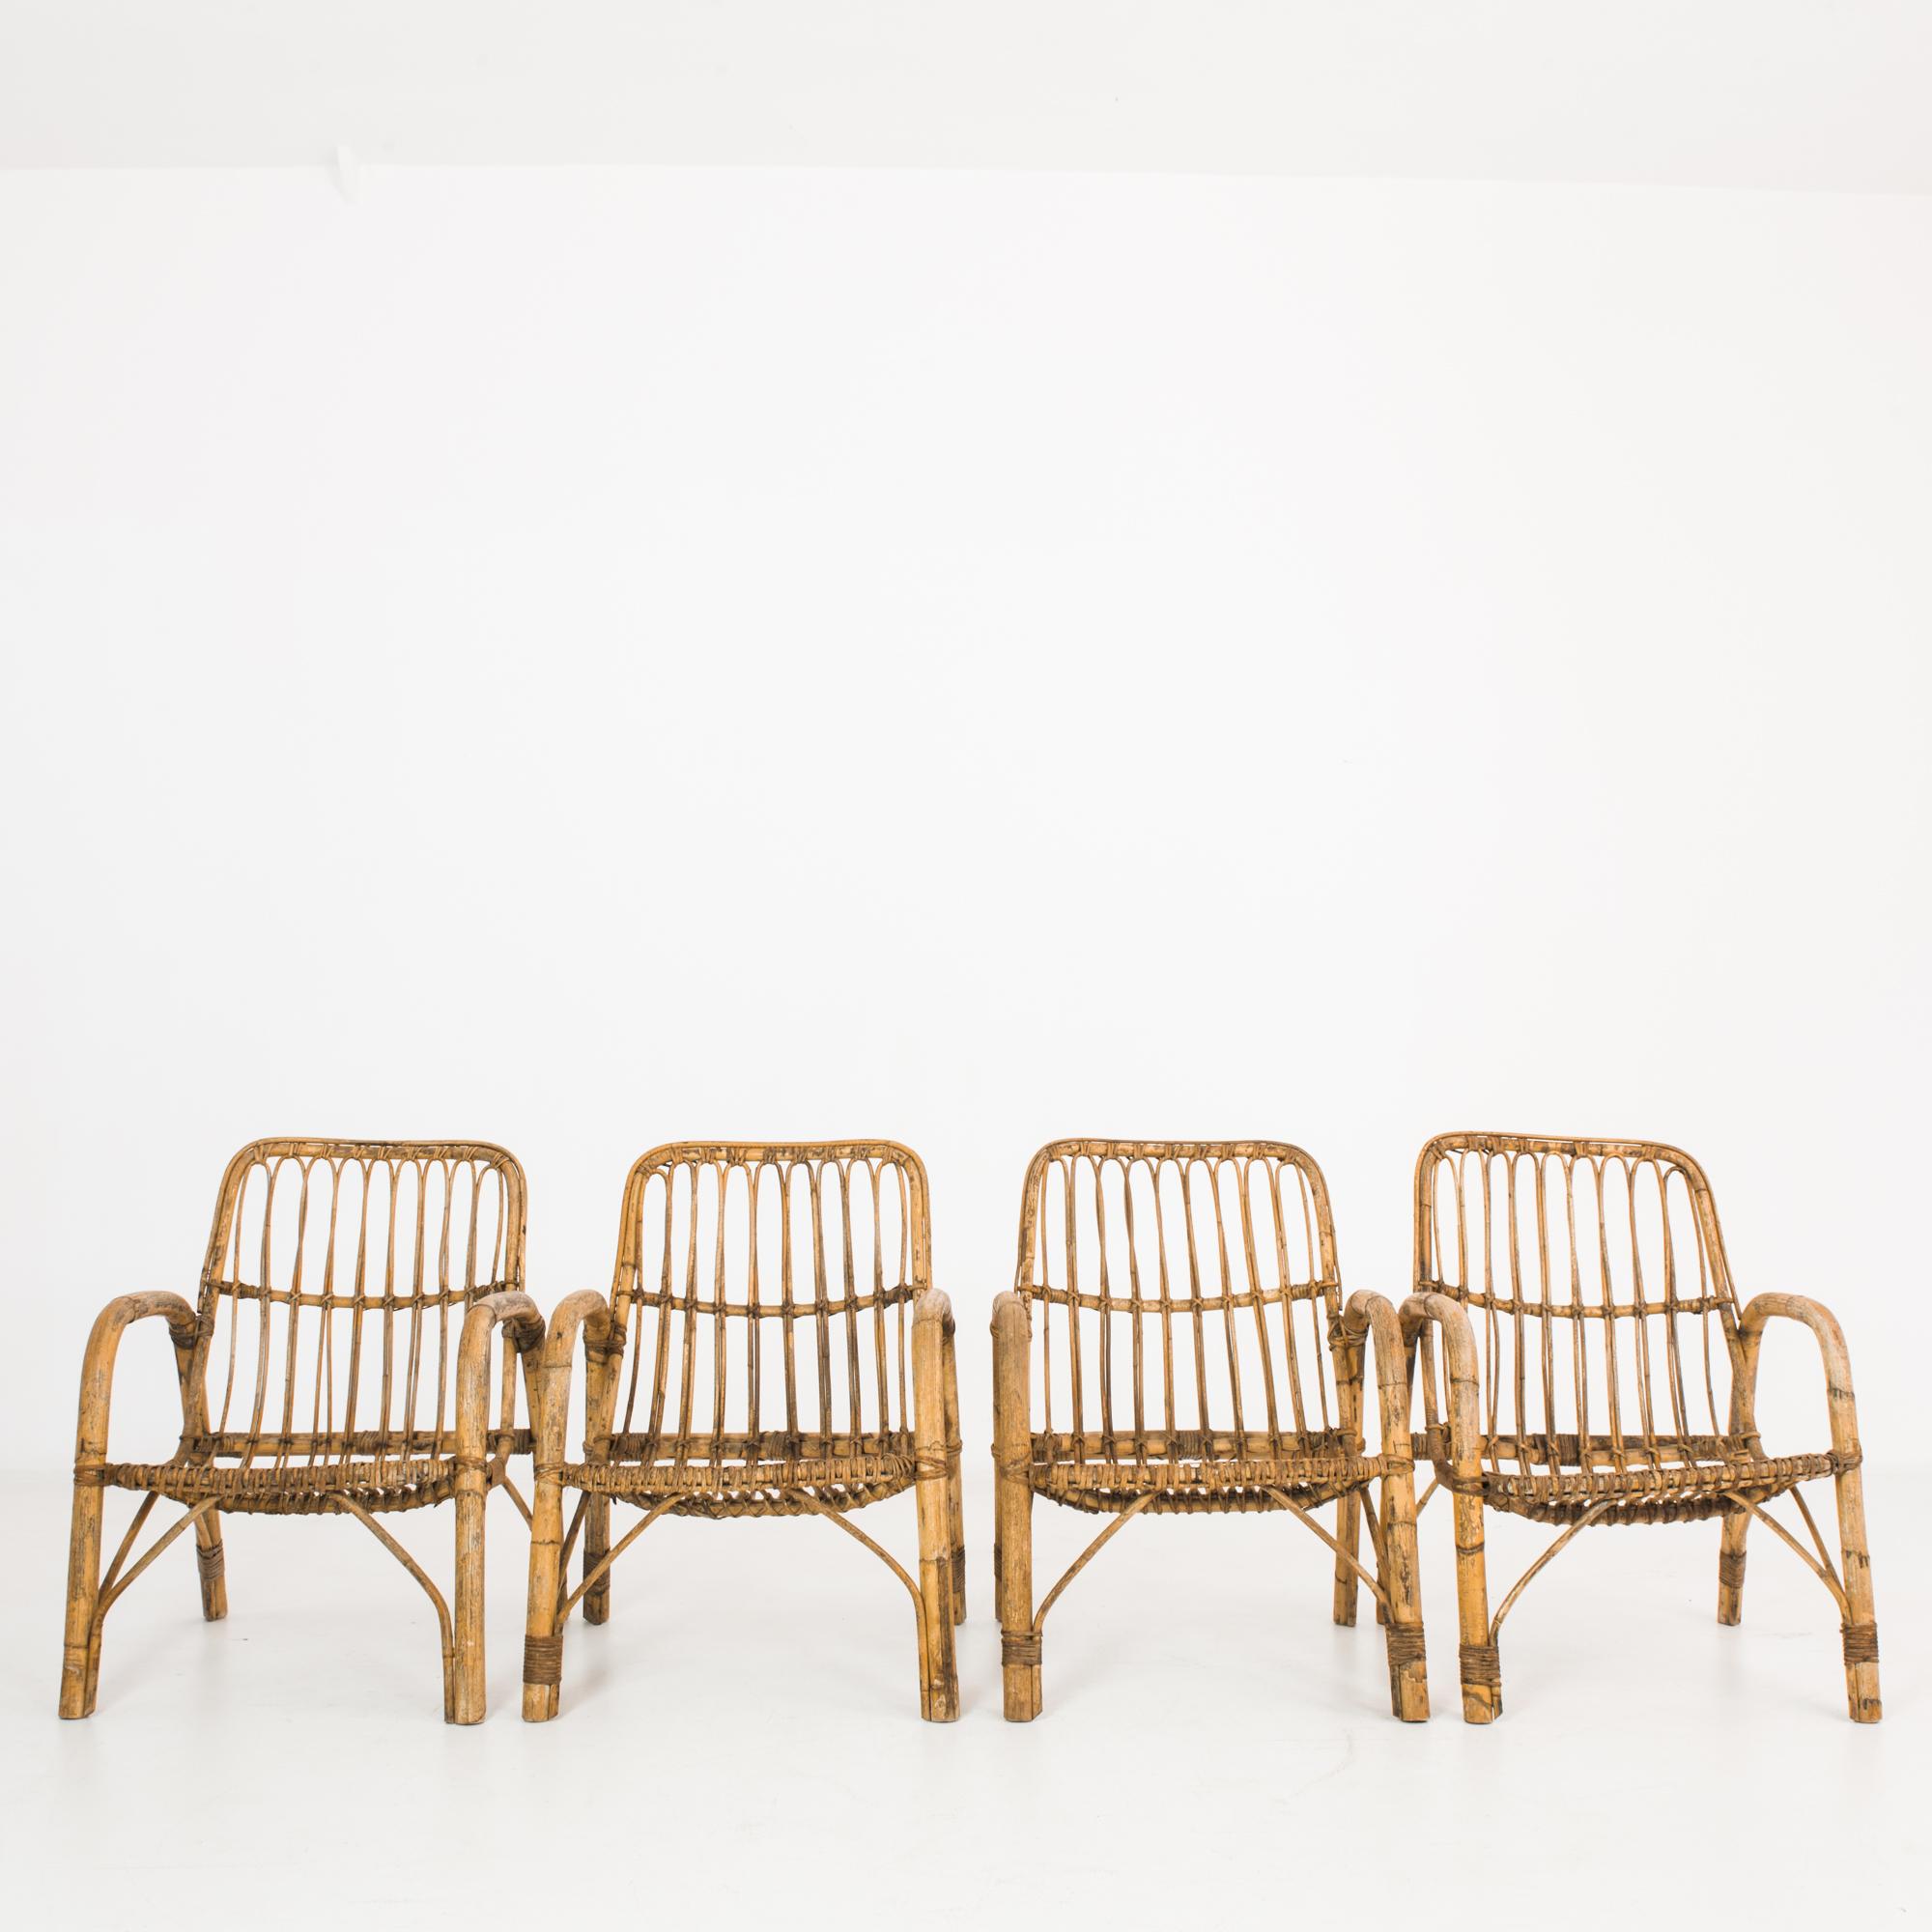 This set of rattan armchairs was made in France, circa 1960. The strength and beauty of the material are on display in its elegant construction. A single stem is bent to form the armrest and legs on each side, while canes are shaped into a gently